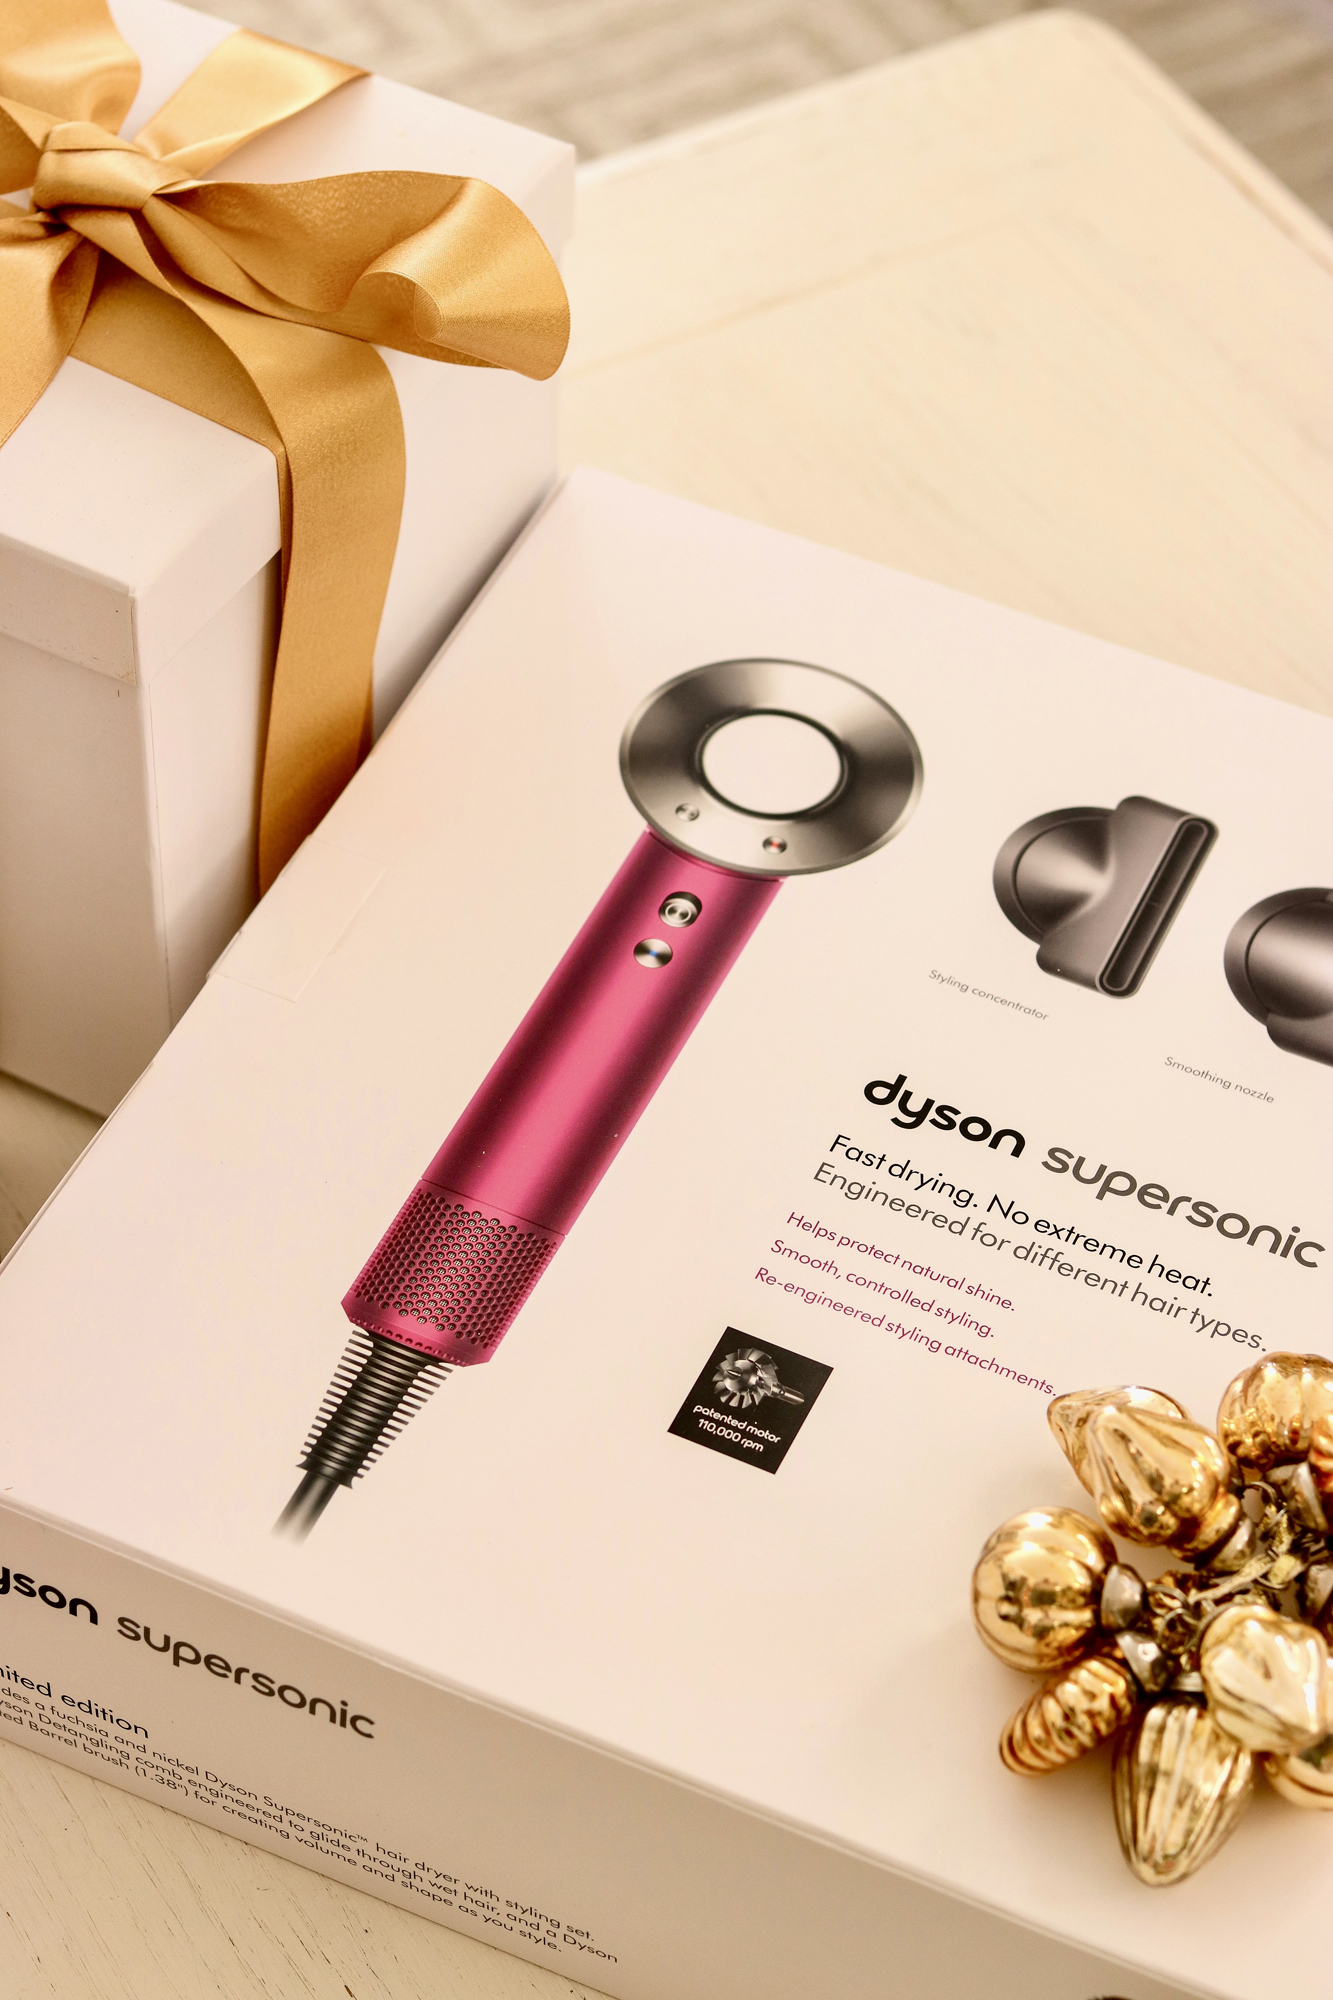 Top Beauty Christmas Gifts: Dyson Hair Dryer review from Nordstrom - affordable and best top haircare gifts dyson hair products